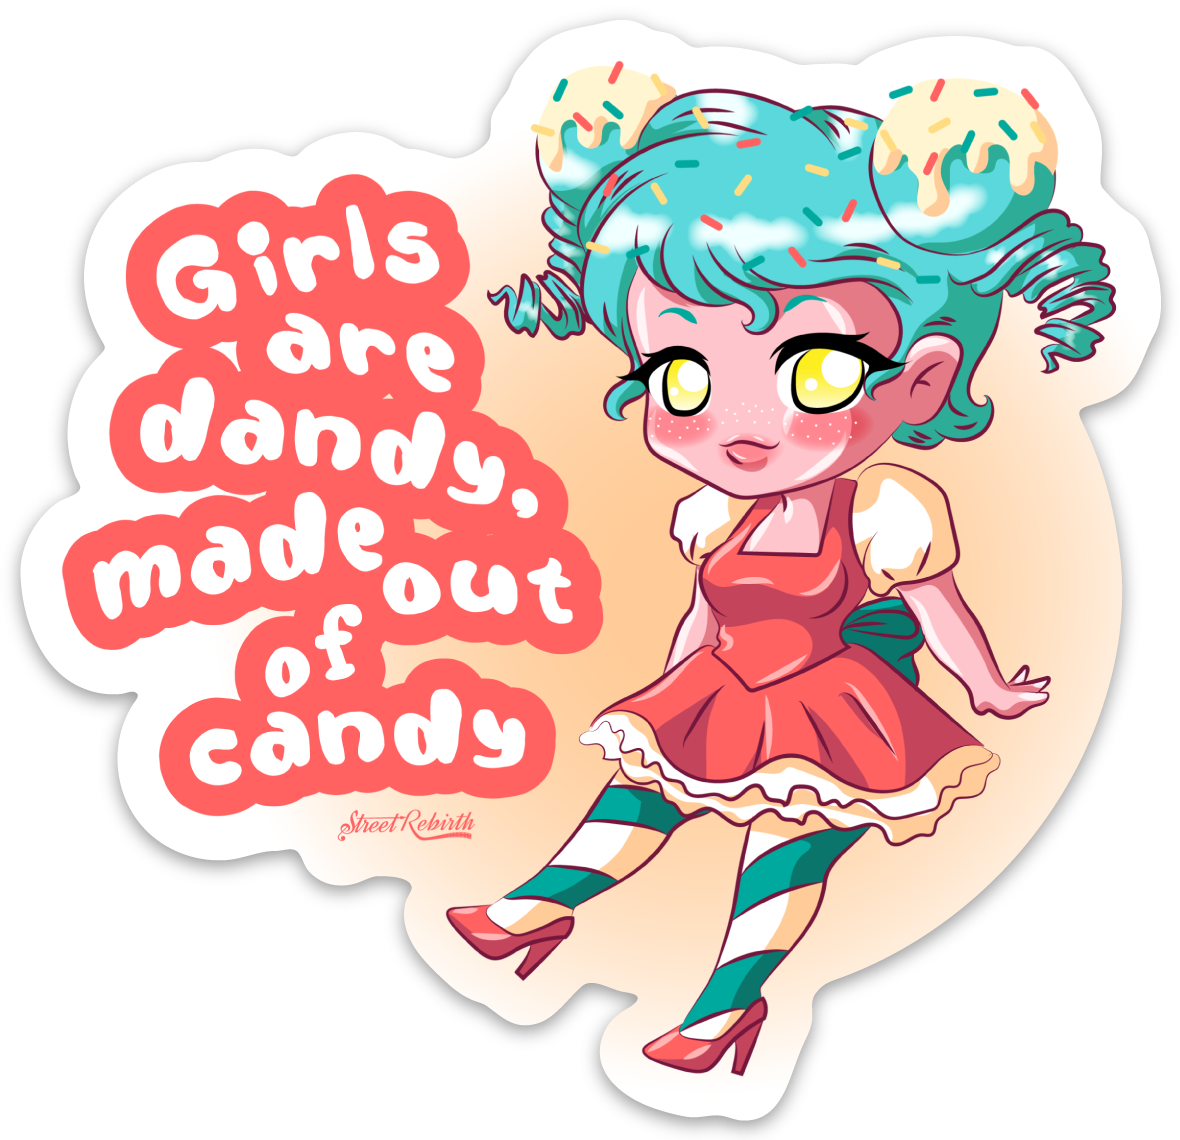 GIRLS ARE DANDY, MADE OUT OF CANDY PUN STICKER – ONE 4 INCH WATER PROOF VINYL STICKER – FOR HYDRO FLASK, SKATEBOARD, LAPTOP, PLANNER, CAR, COLLECTING, GIFTING